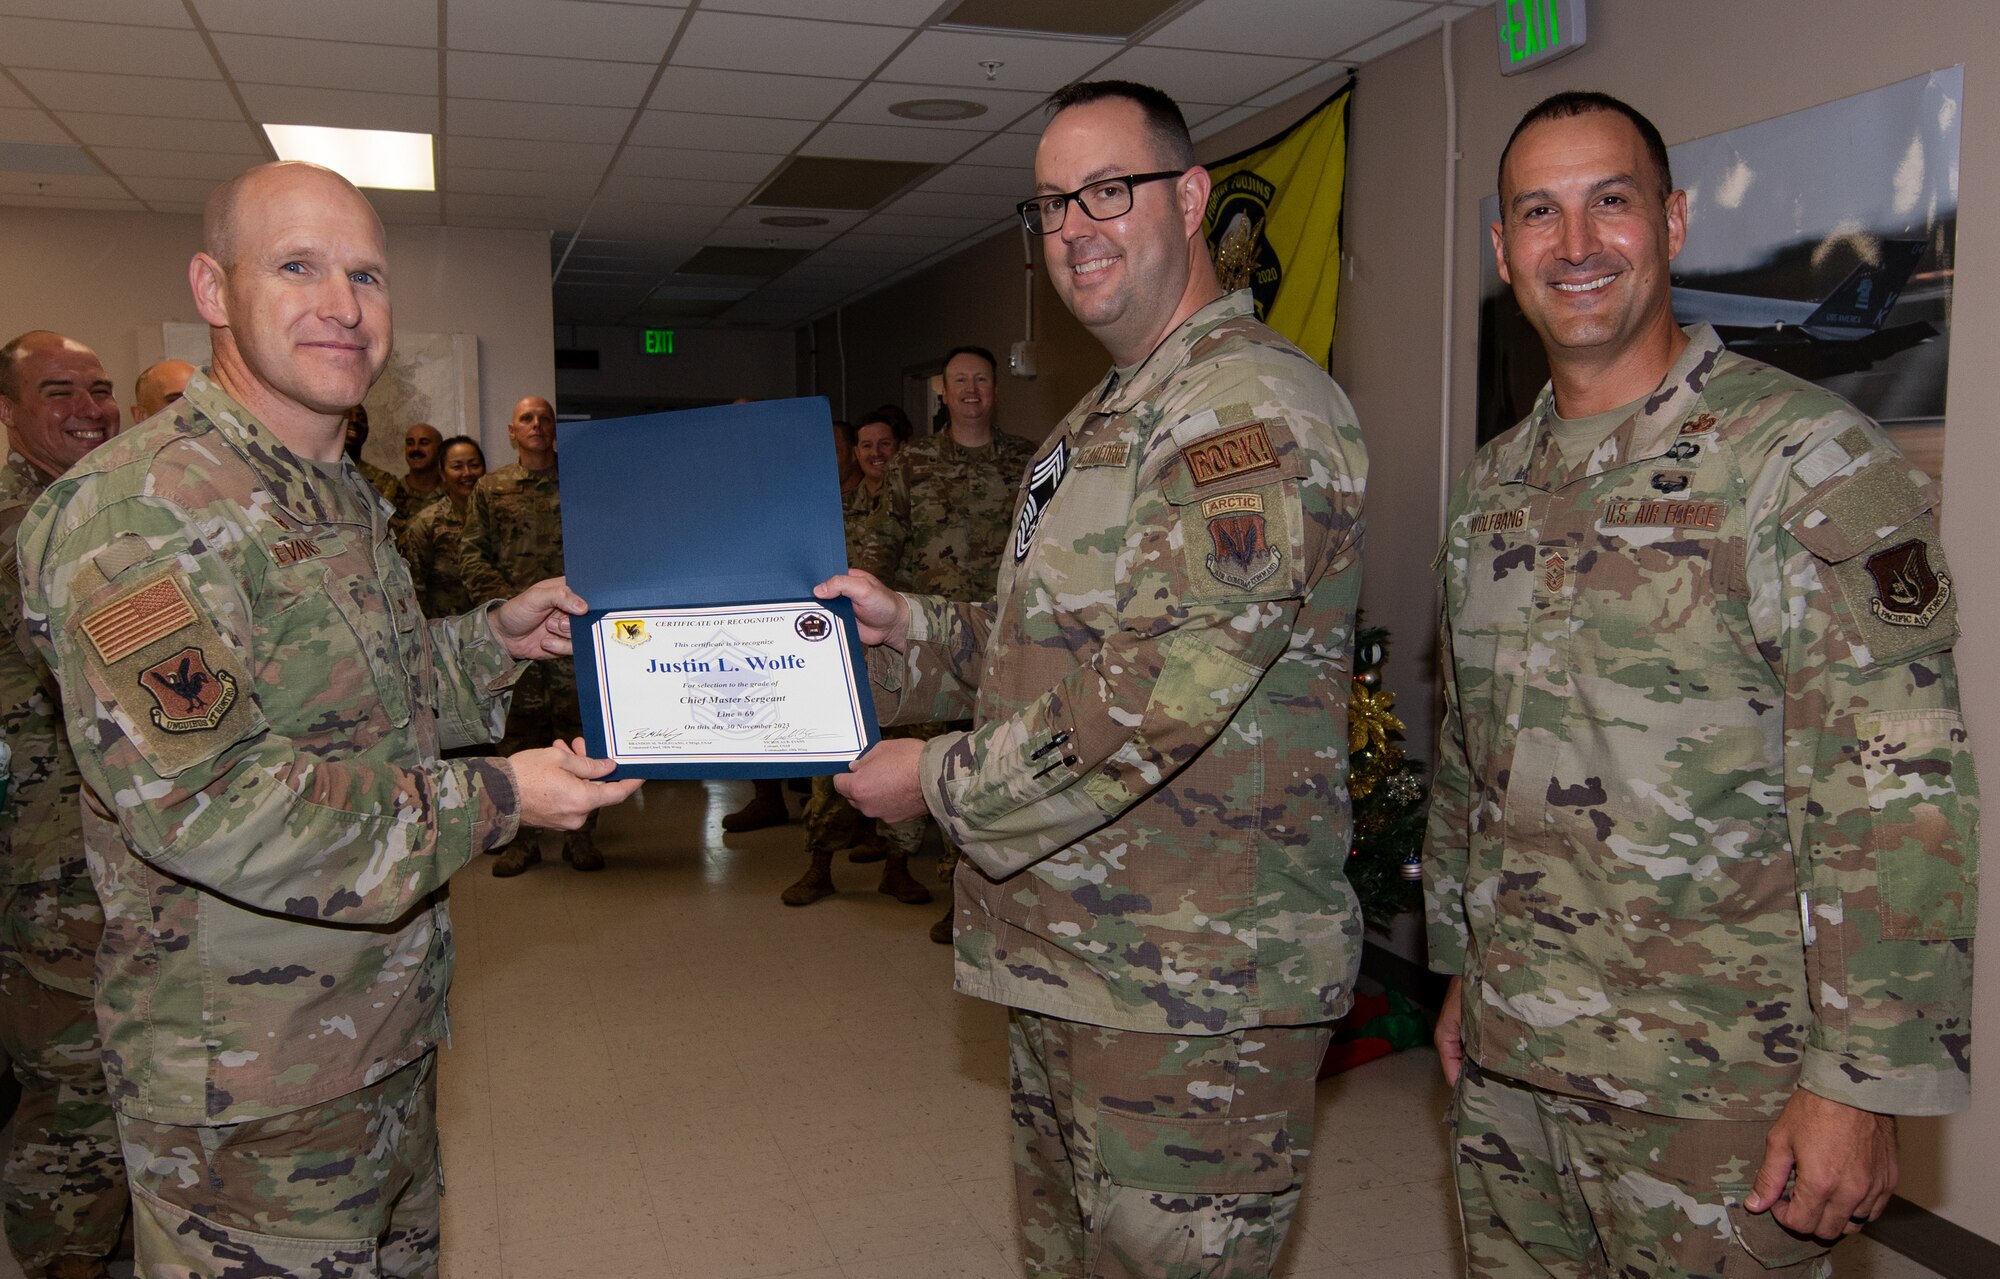 Three U.S. Air Force service members pose with a certificate.